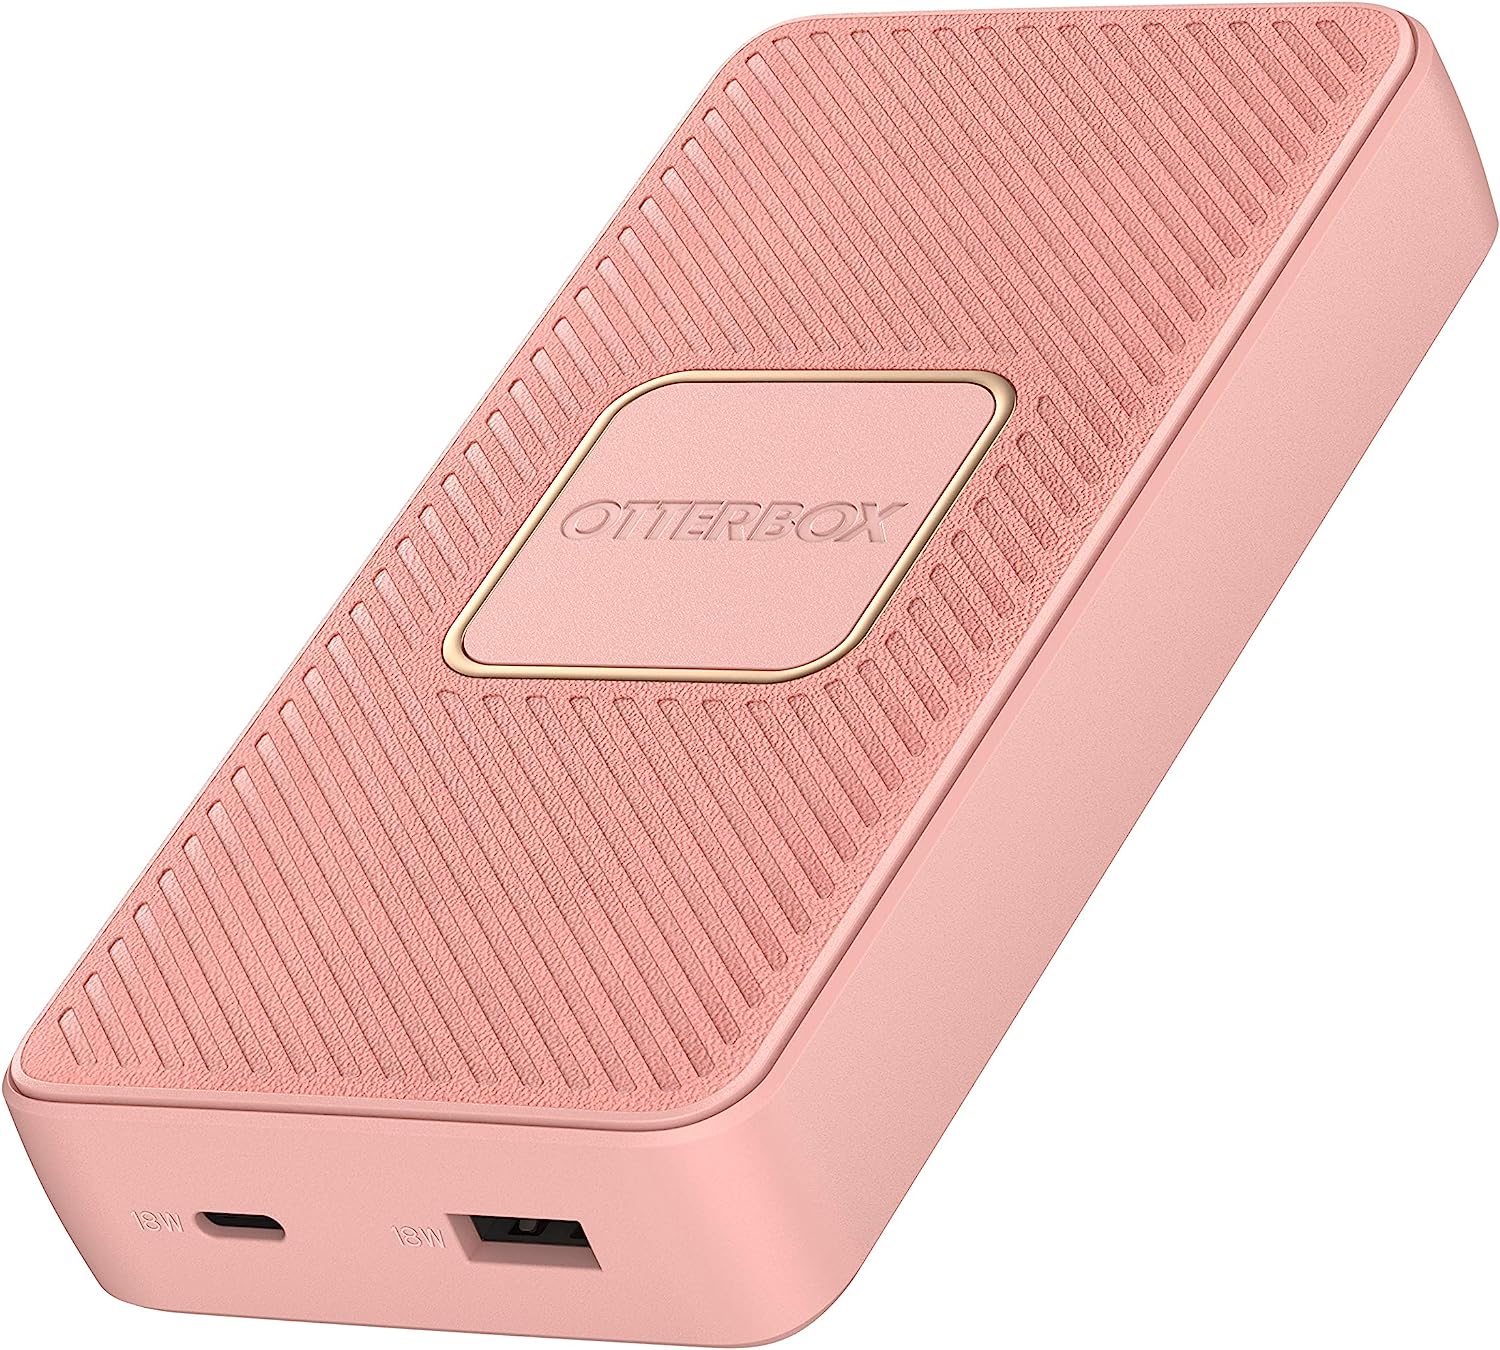 OtterBox Fast Charge Power Bank 15,000mAh with 10W Qi Wireless Charging - Pink (New)